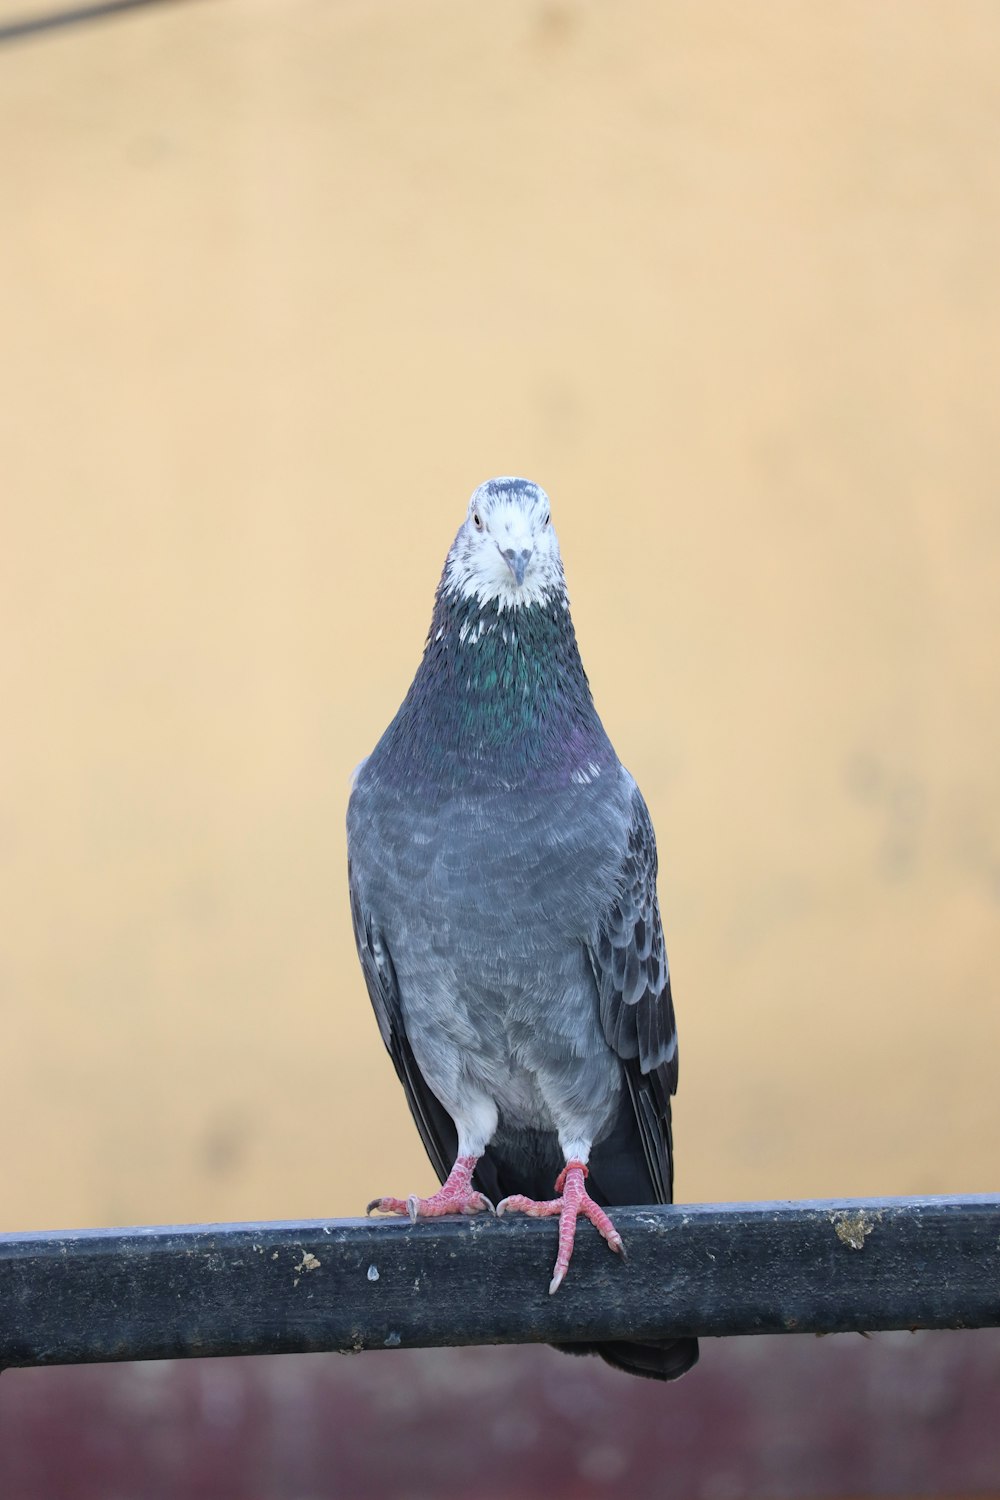 a pigeon is perched on a metal rail